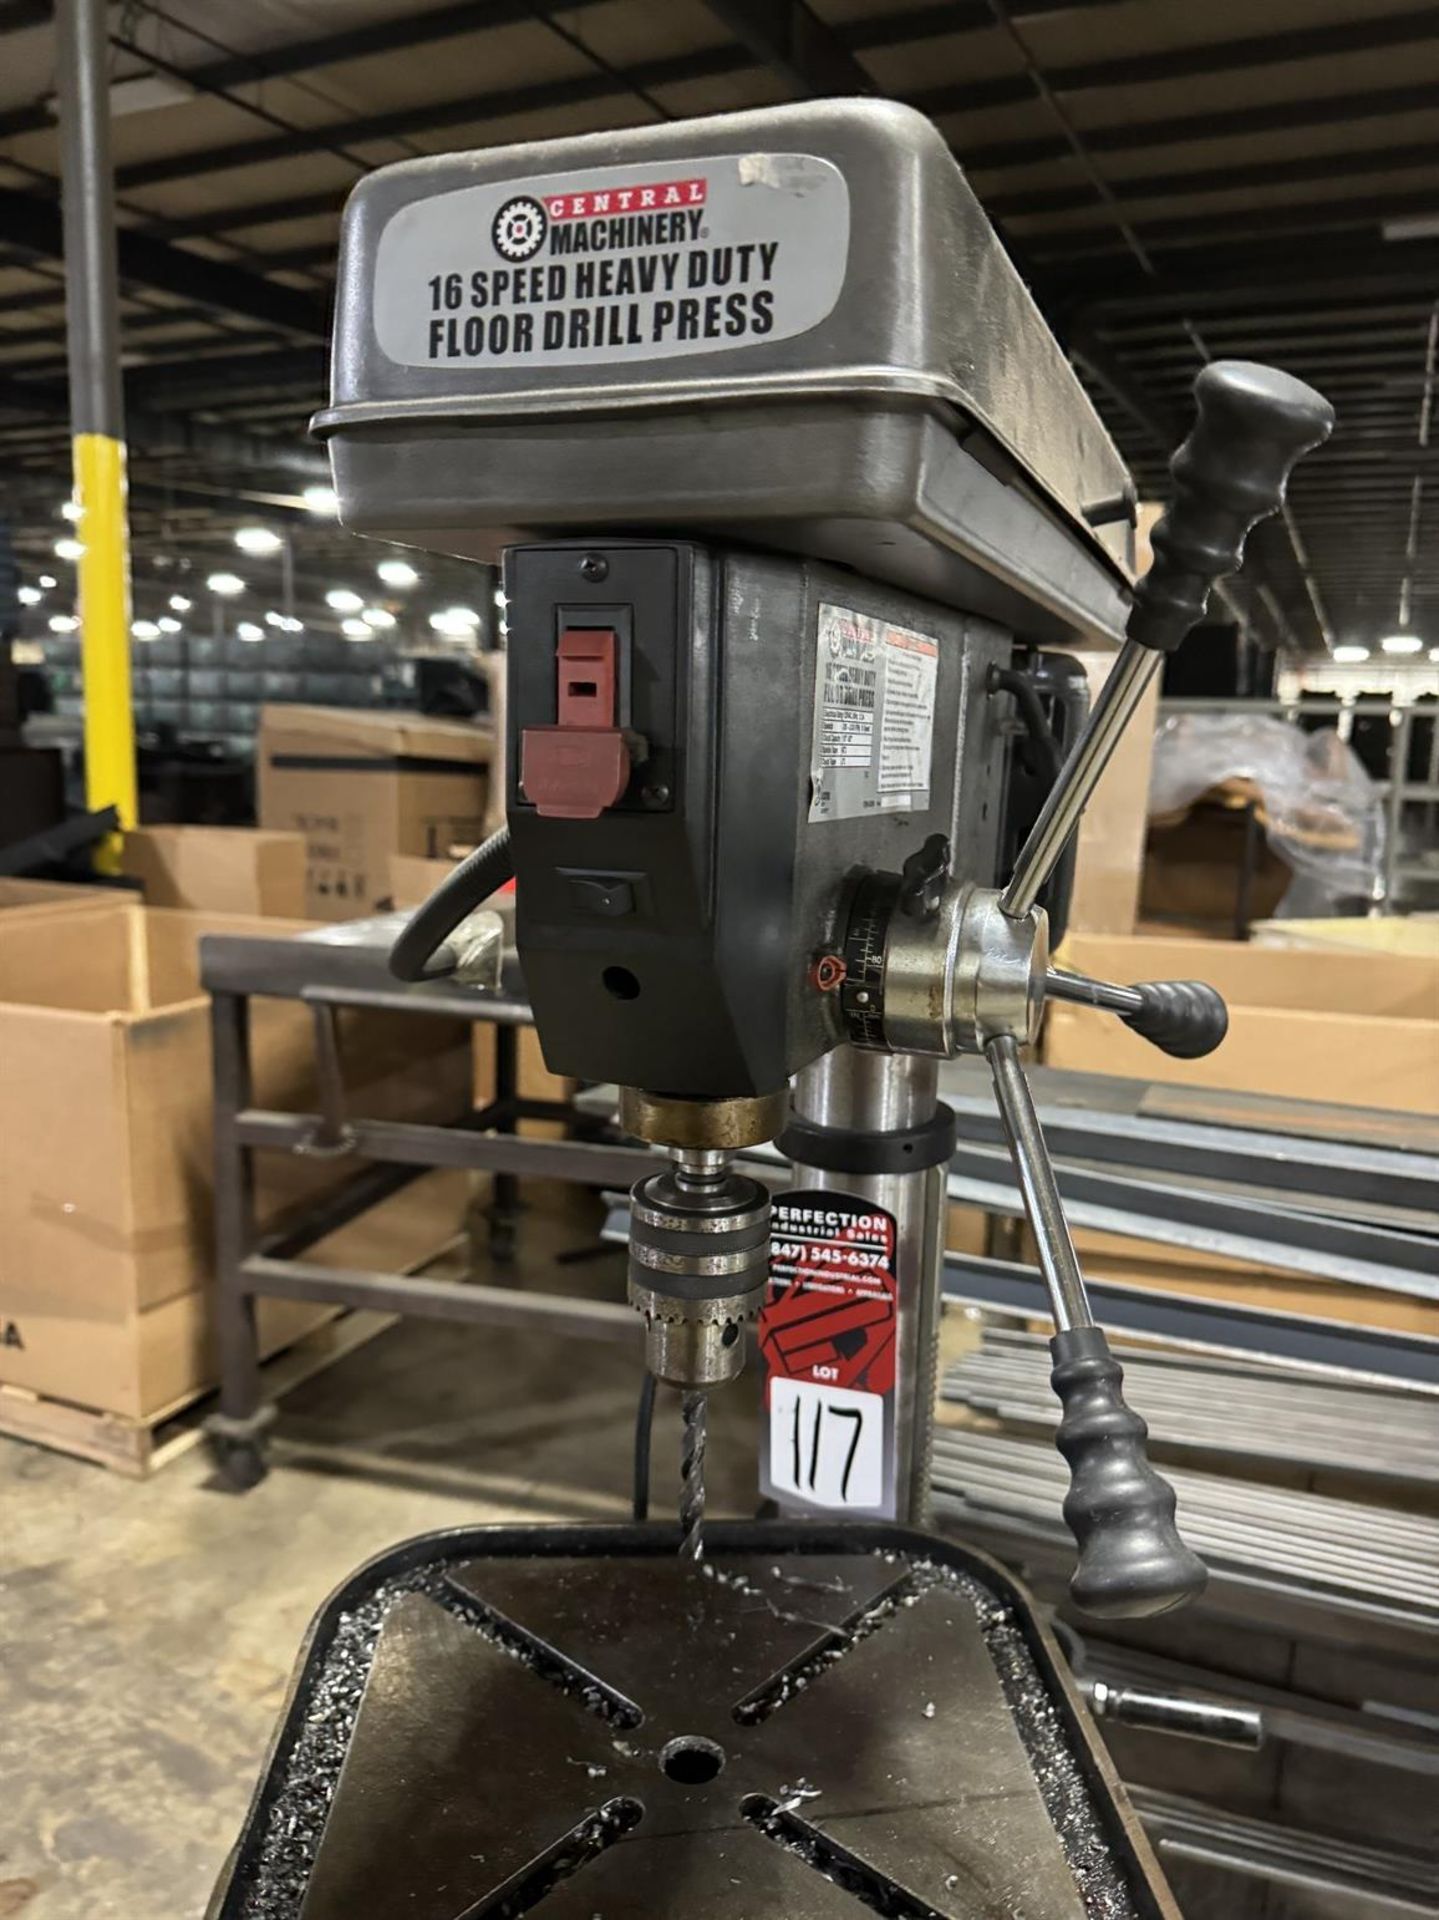 CENTRAL MACHINERY 16-Speed Heavy Duty Drill Press, s/n 355851522, 200-3630 RPM, 11.5" x 11.25" - Image 3 of 5